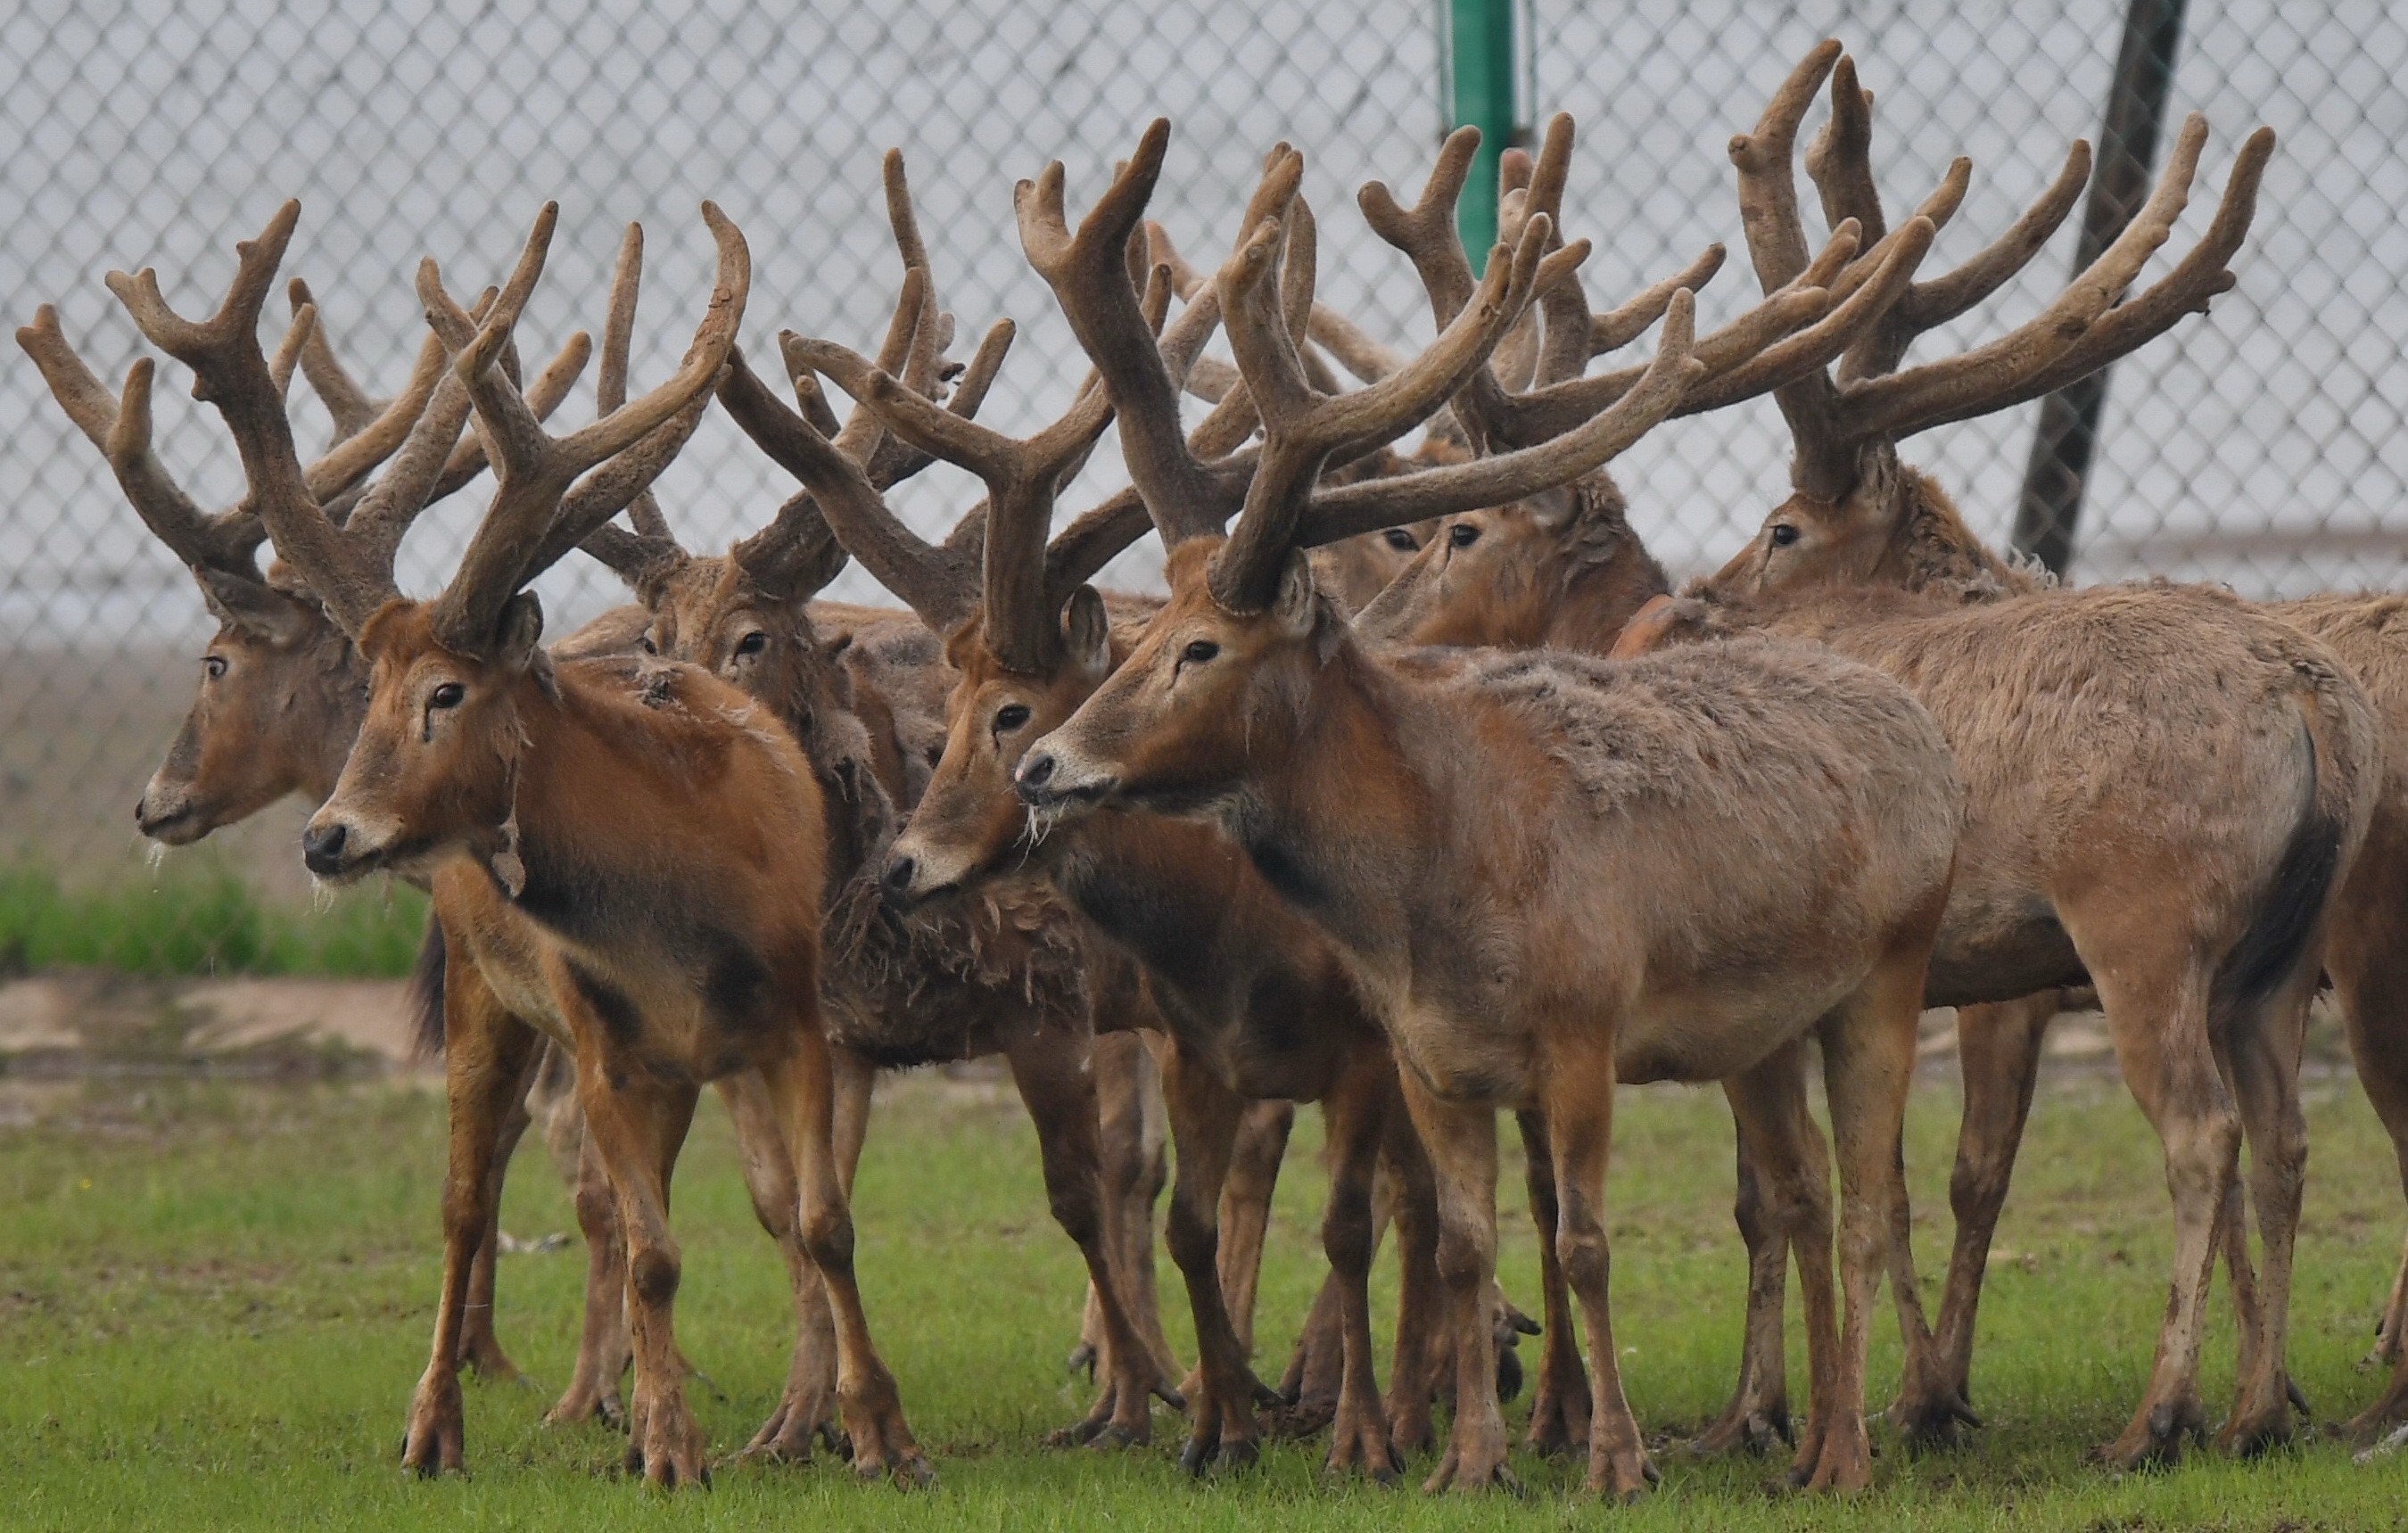 Deer antlers: the fastest growing tissue with least cancer occurrence